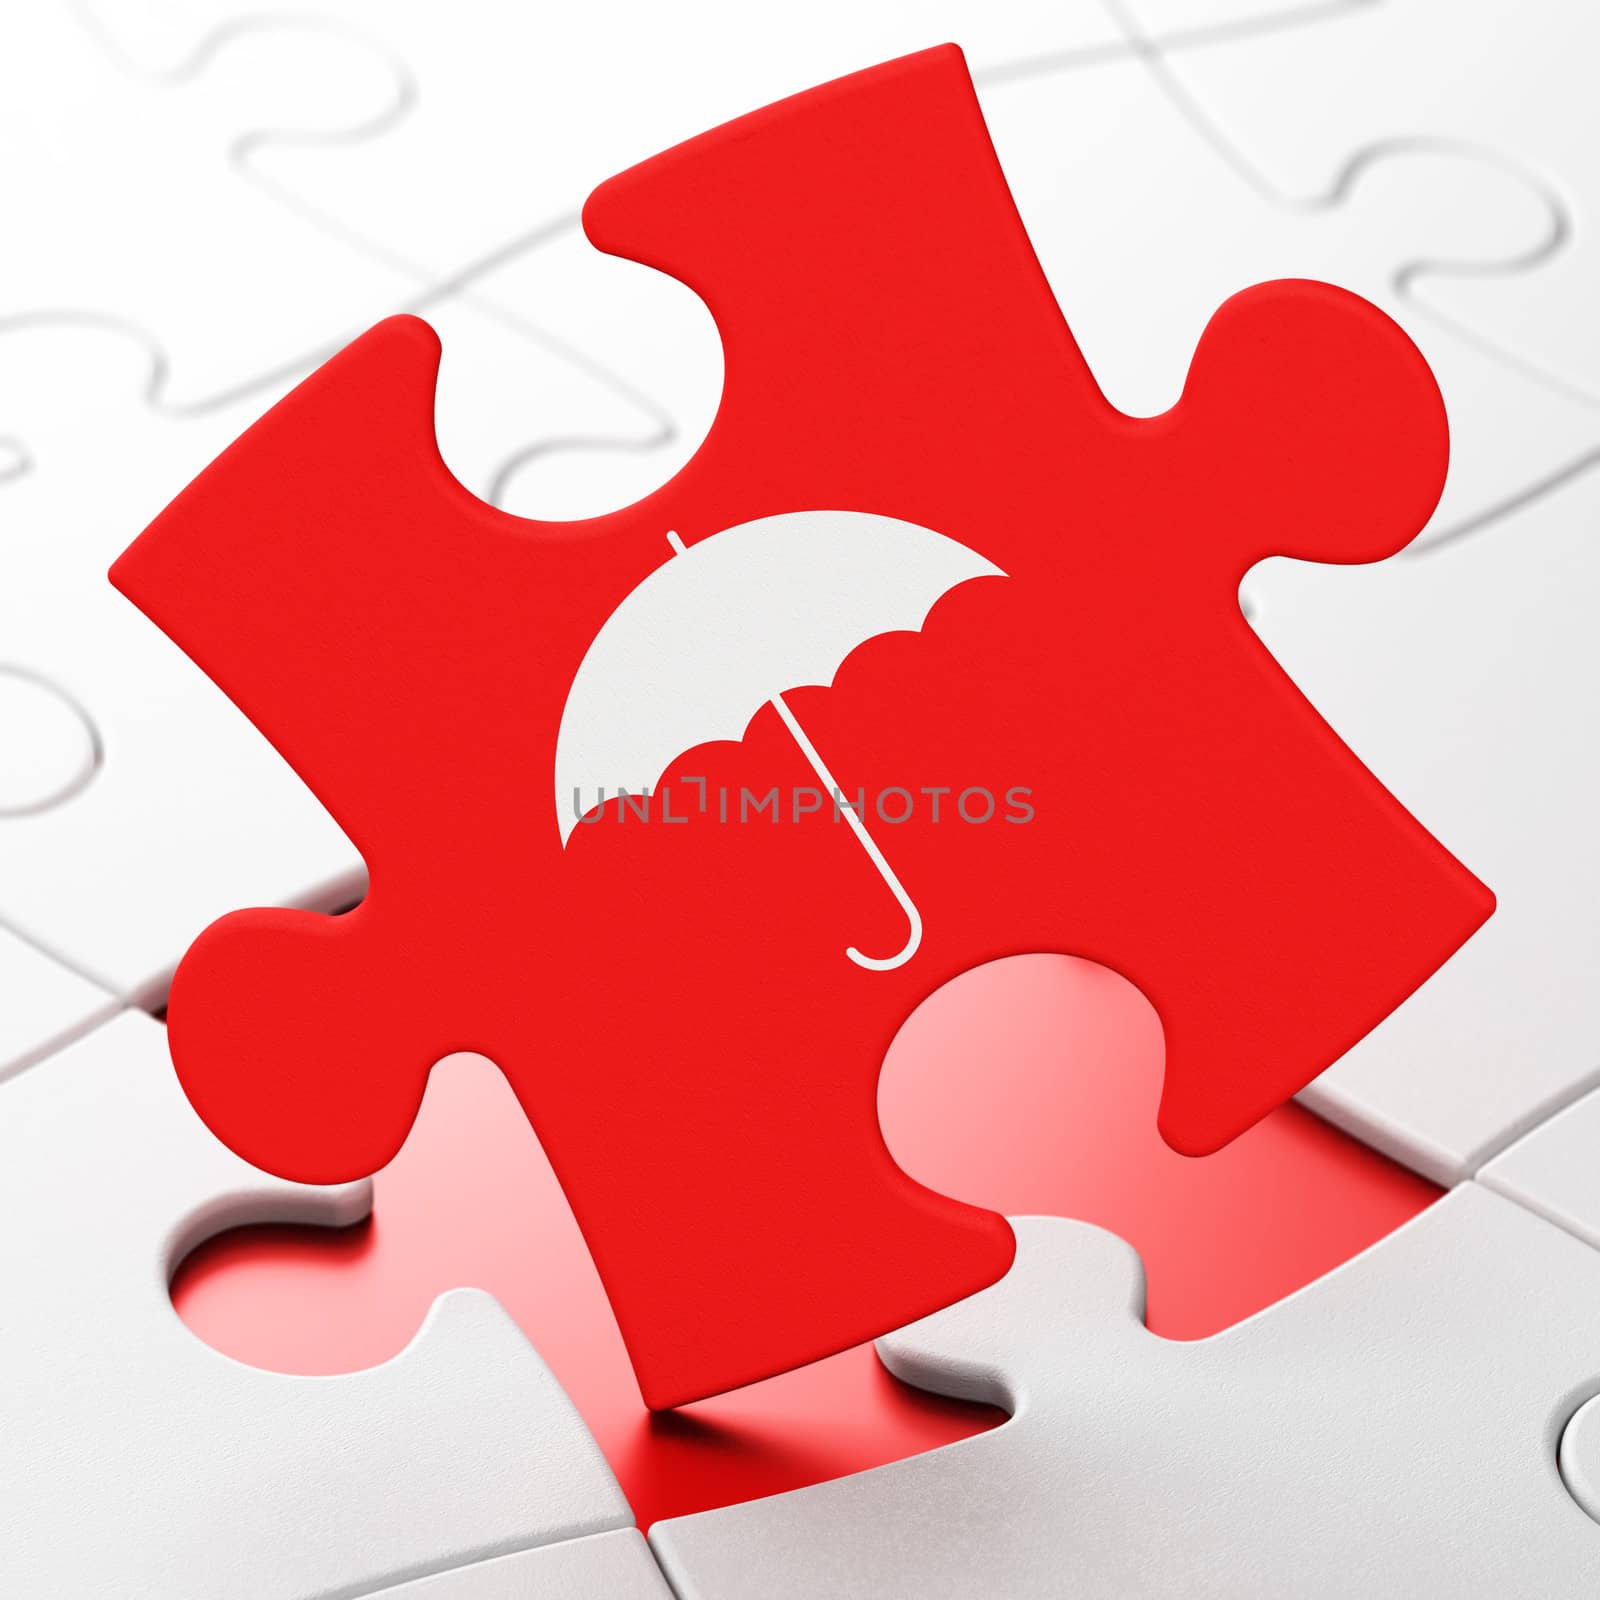 Protection concept: Umbrella on Red puzzle pieces background, 3d render